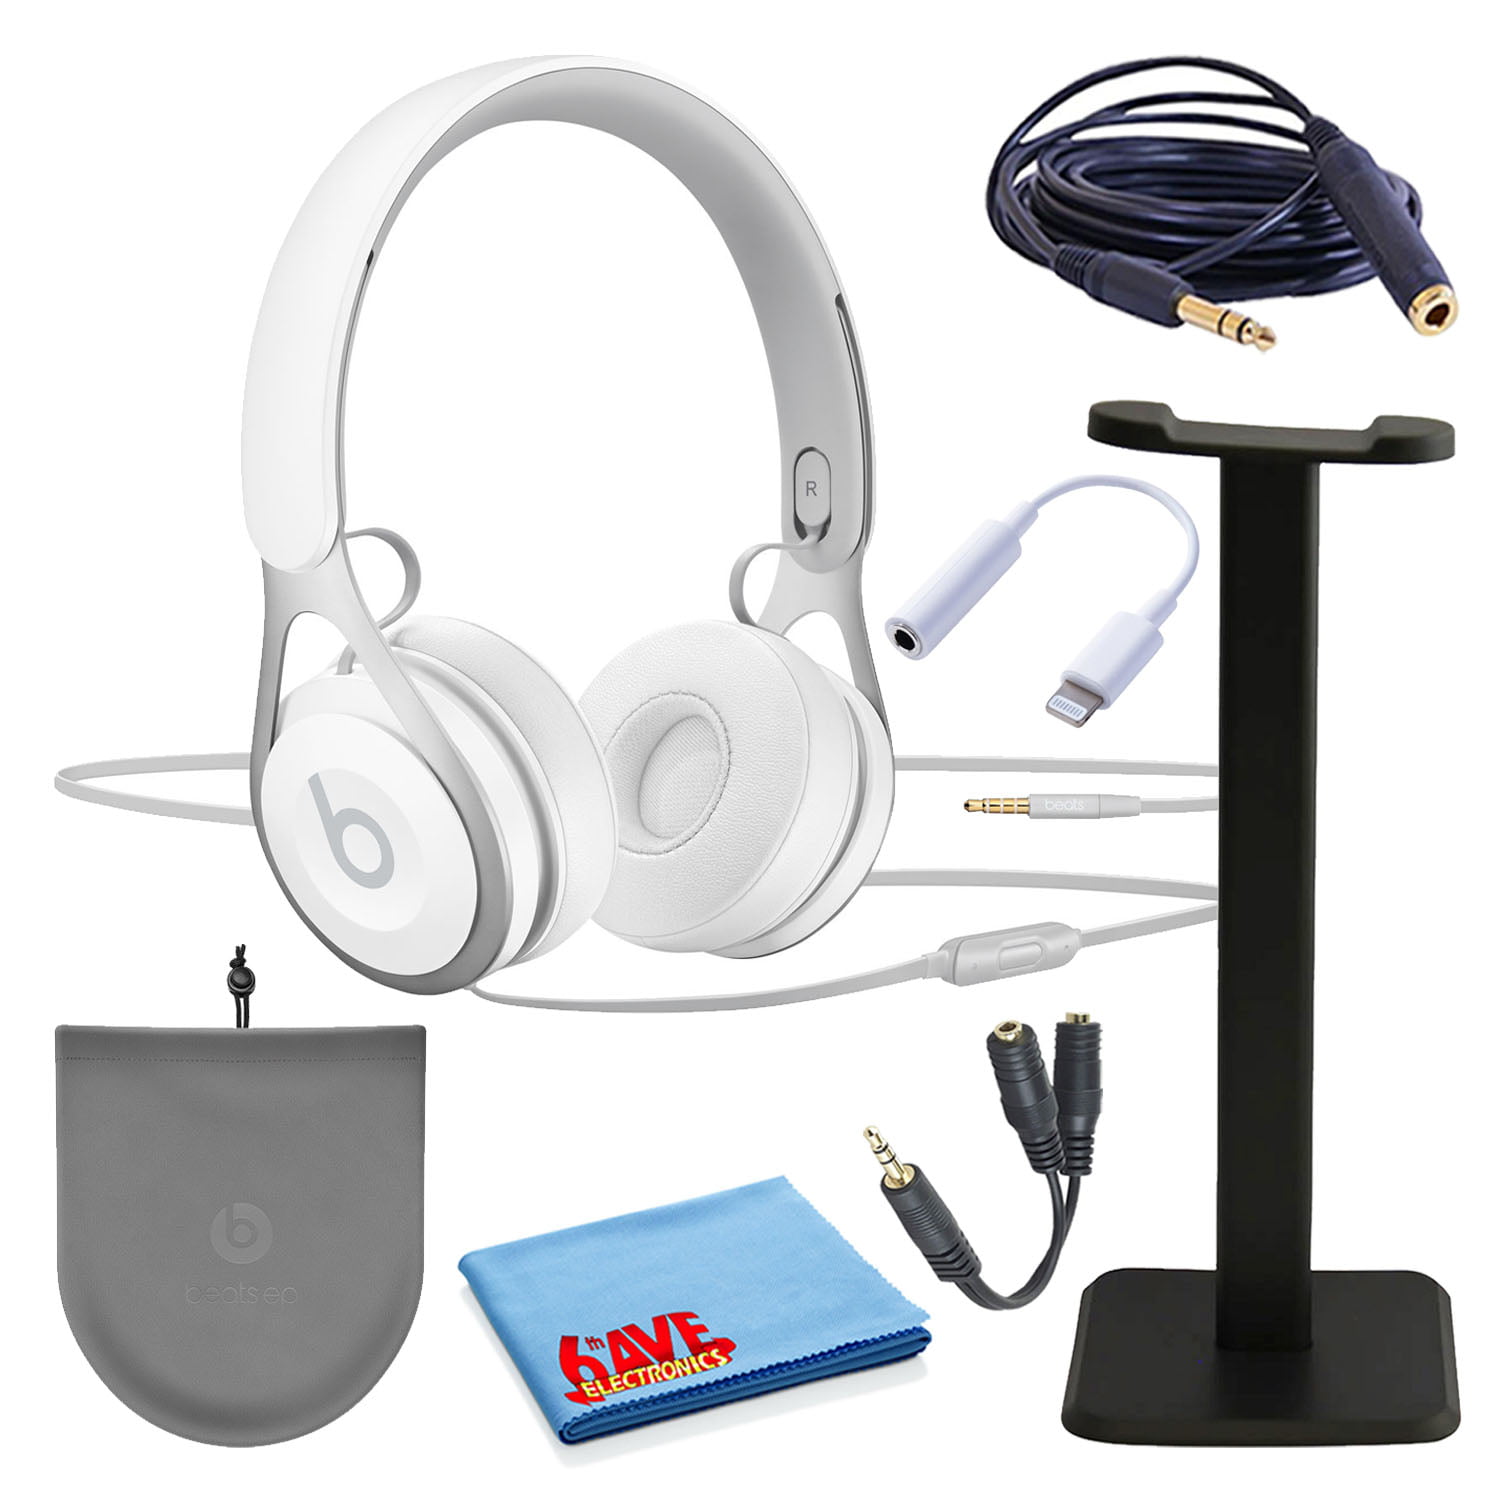 Beats EP Wired Headphones - White (ML9A2LL/A) Bundle with Headphone Stand + Extension Cable + 3.5mm Jack Adapter + More - Walmart.com